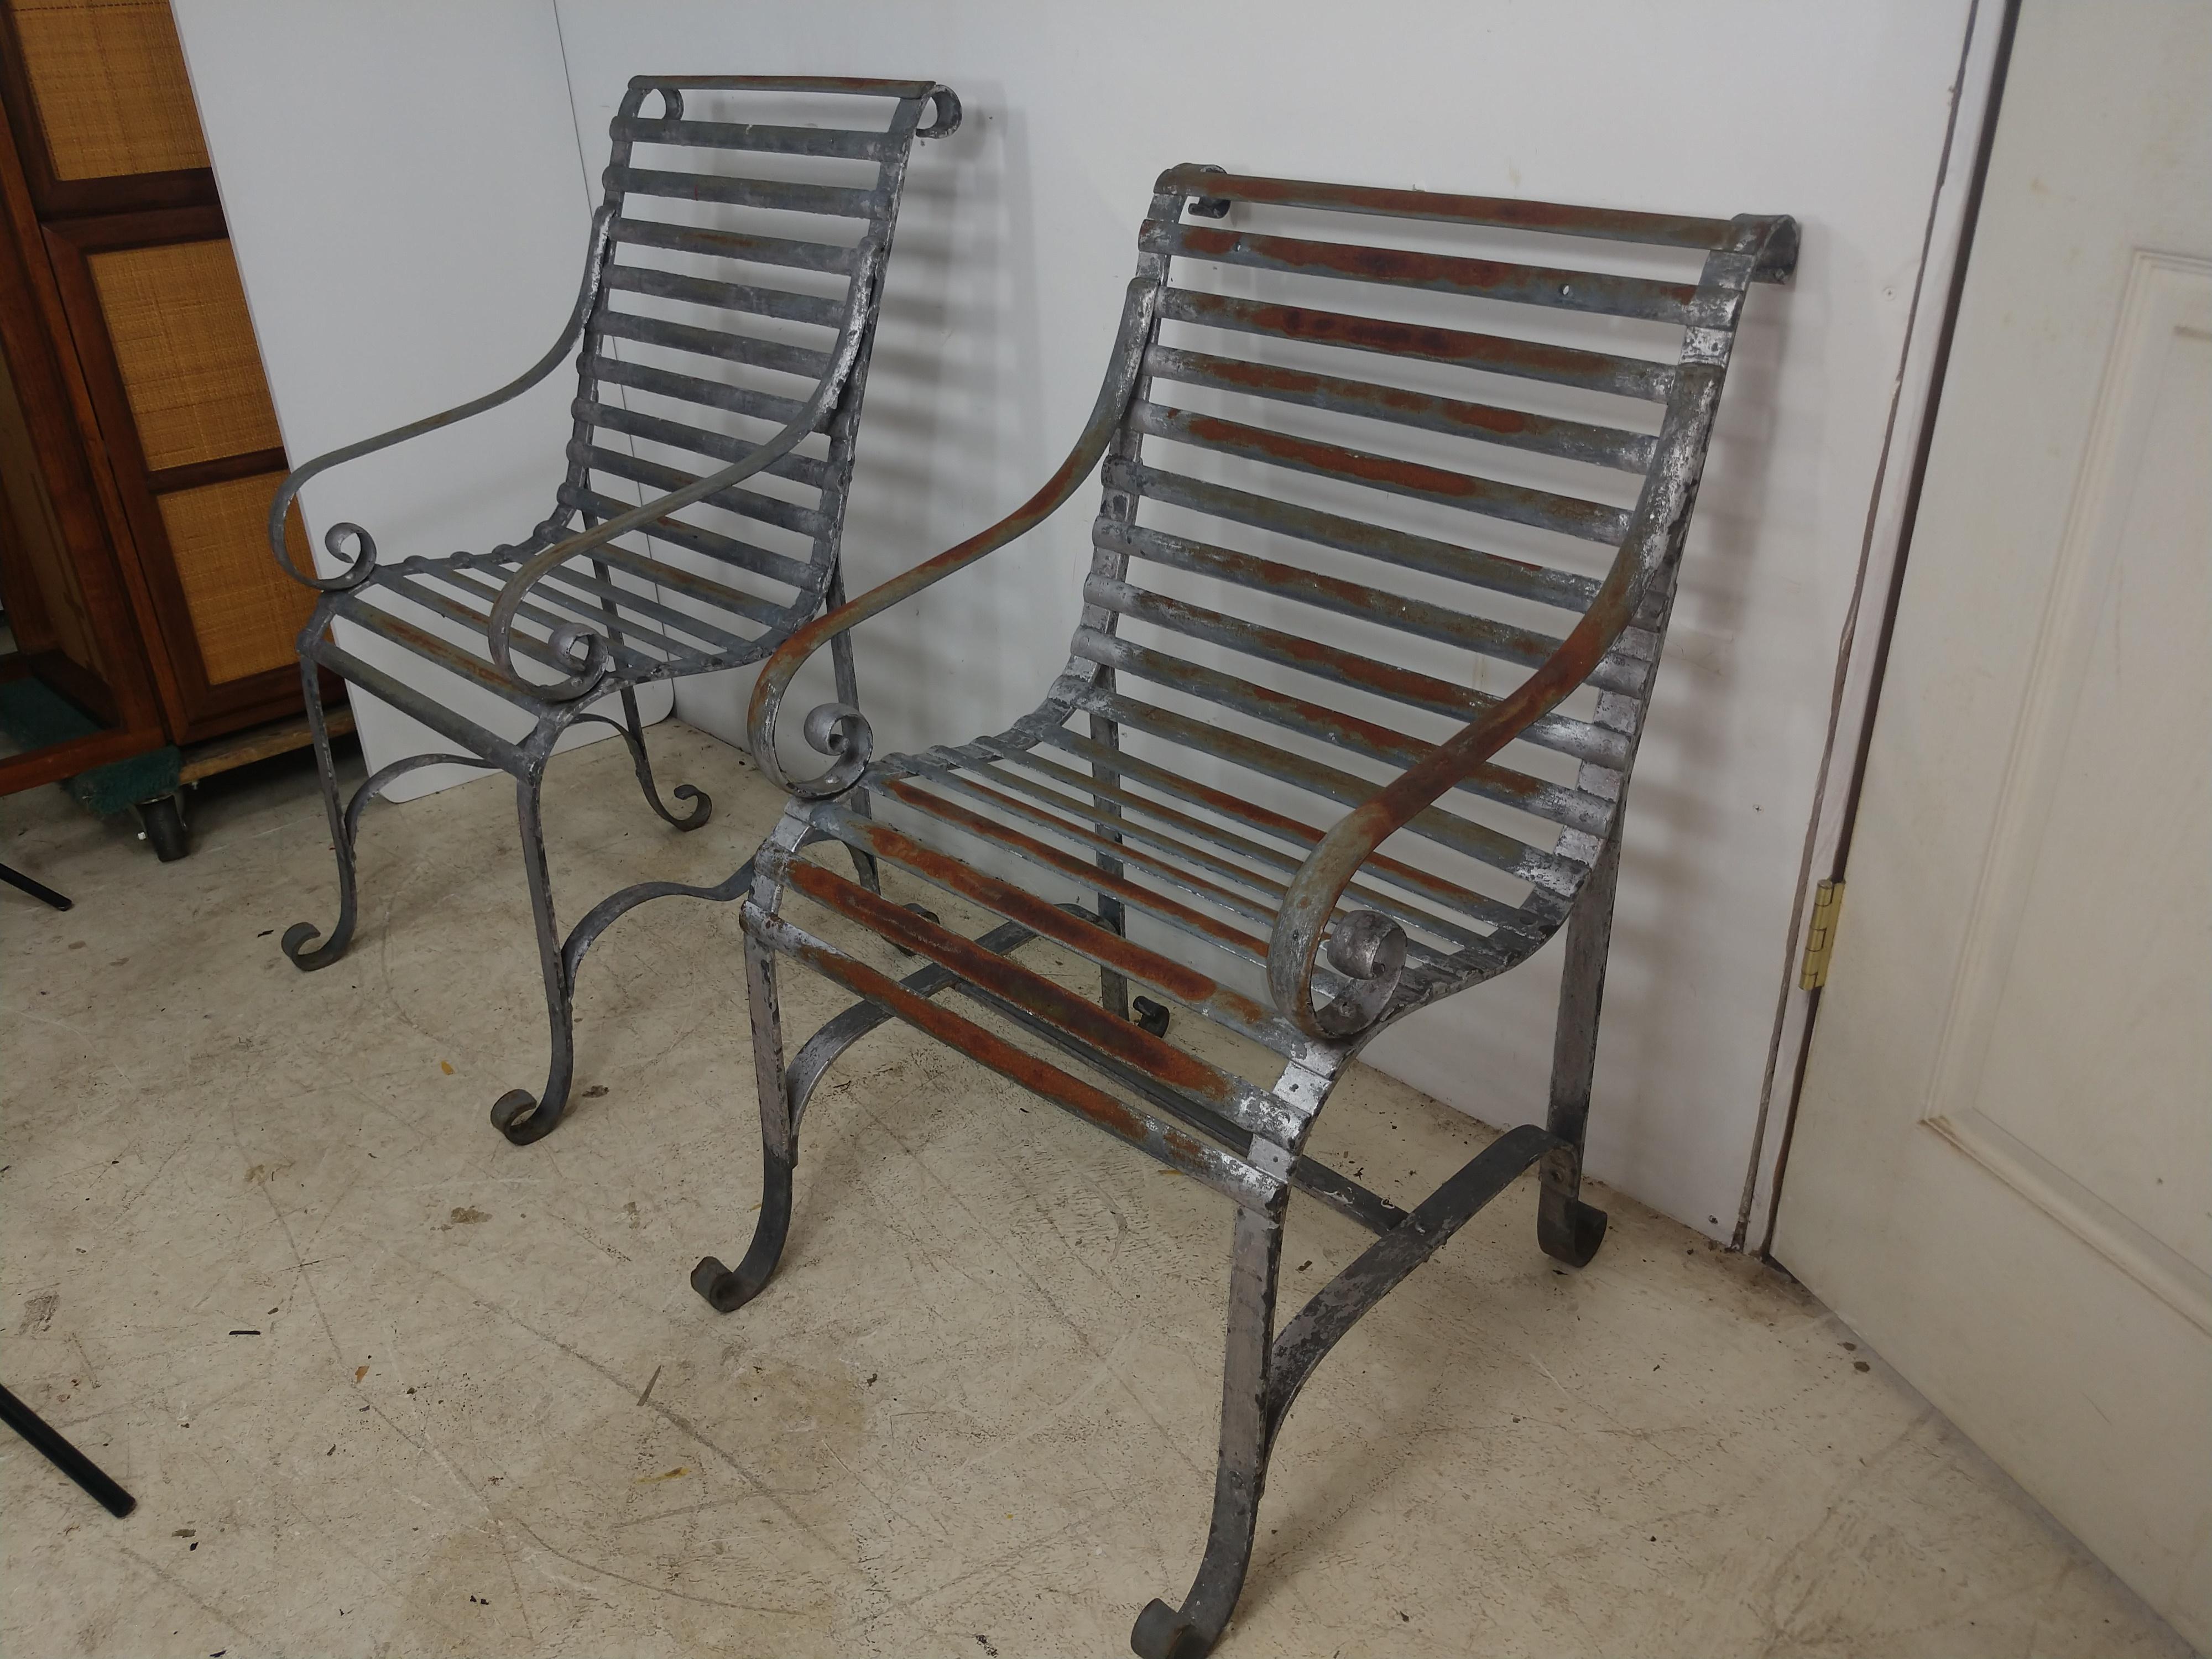 Excellent pair of zinc coated, (galvanized), strap armchairs. In excellent vintage condition with minimal wear, some surface rust, patina, well maintained with original paint. Priced and sold as a pair. Seat hgt is 17.25.